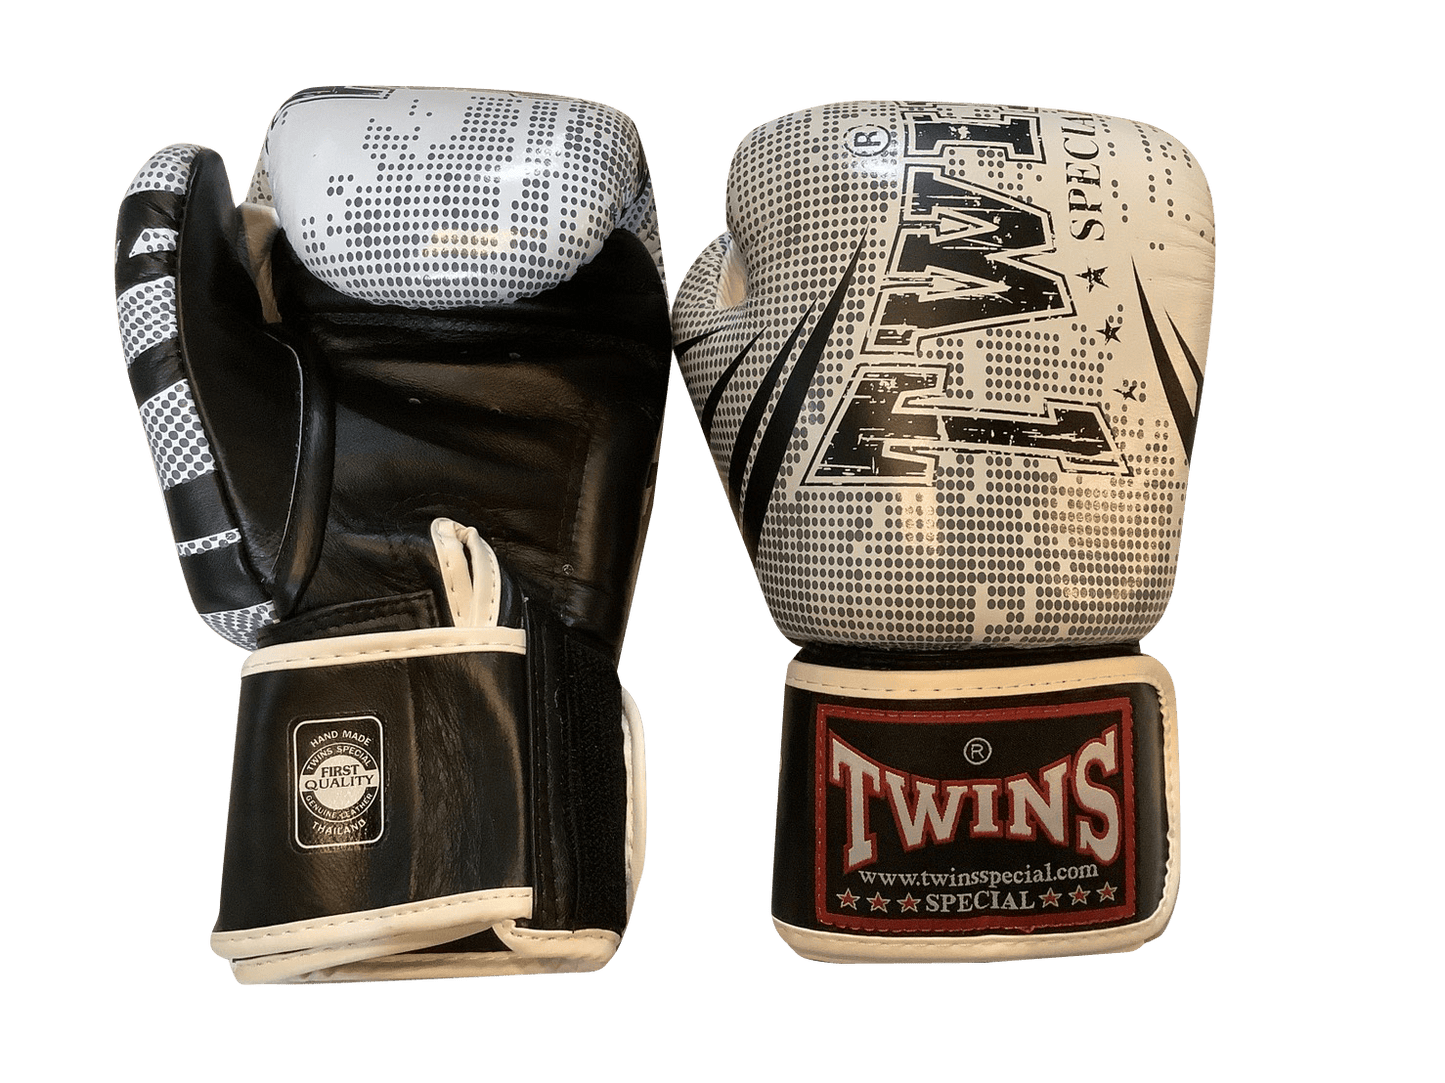 Twins Special FBGVL3-TW5 WHITE/BLACK BOXING GLOVES